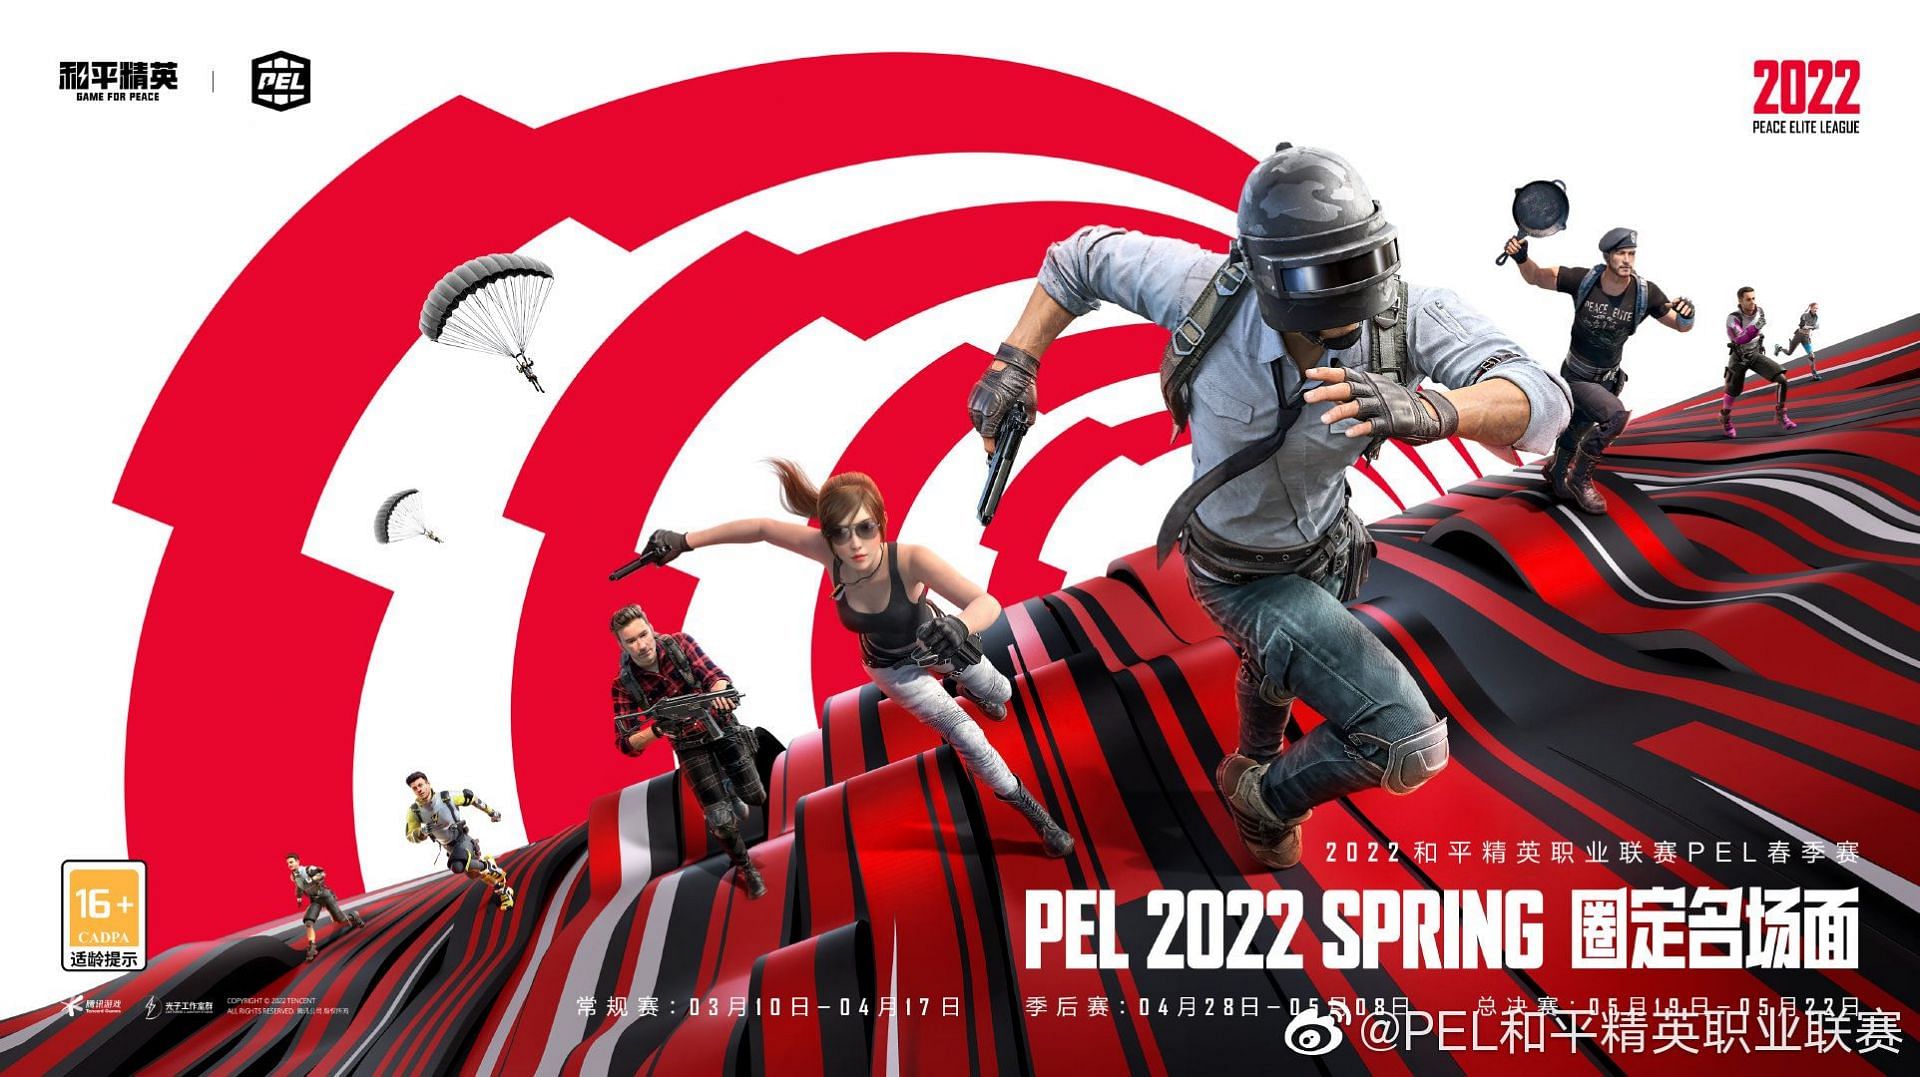 The PEL 2022 Spring Season will kick off on 4 March (Image via Tencent)